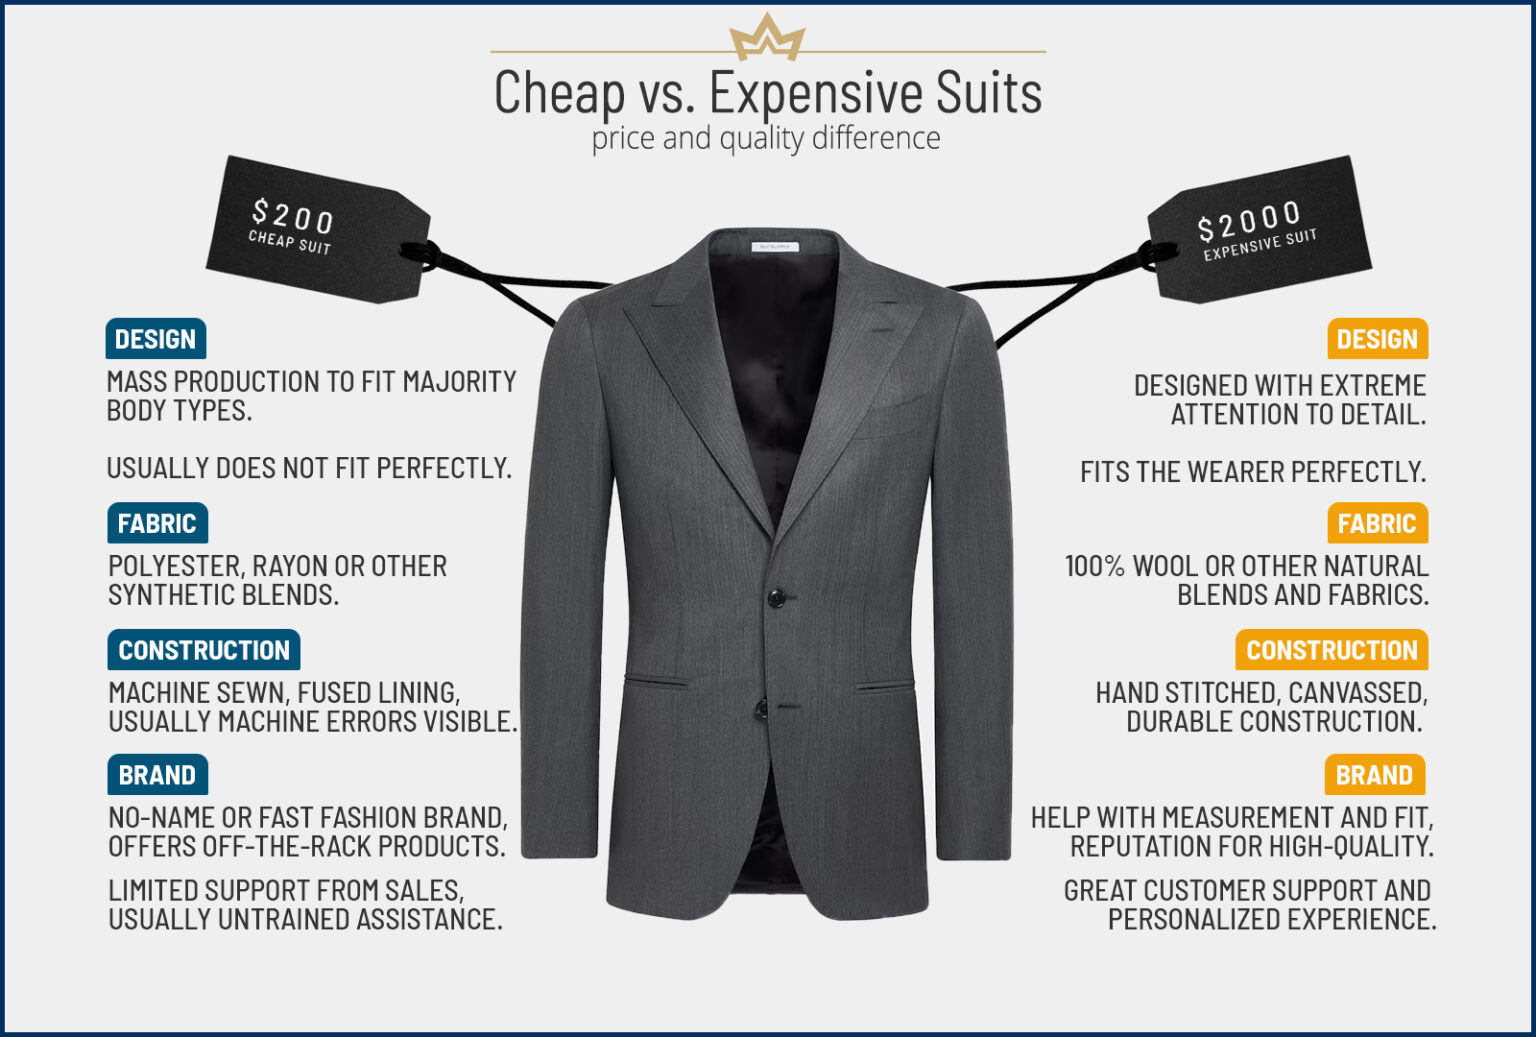 4 Differences in Suit Costs Between Custom vs. Off-the-Rack